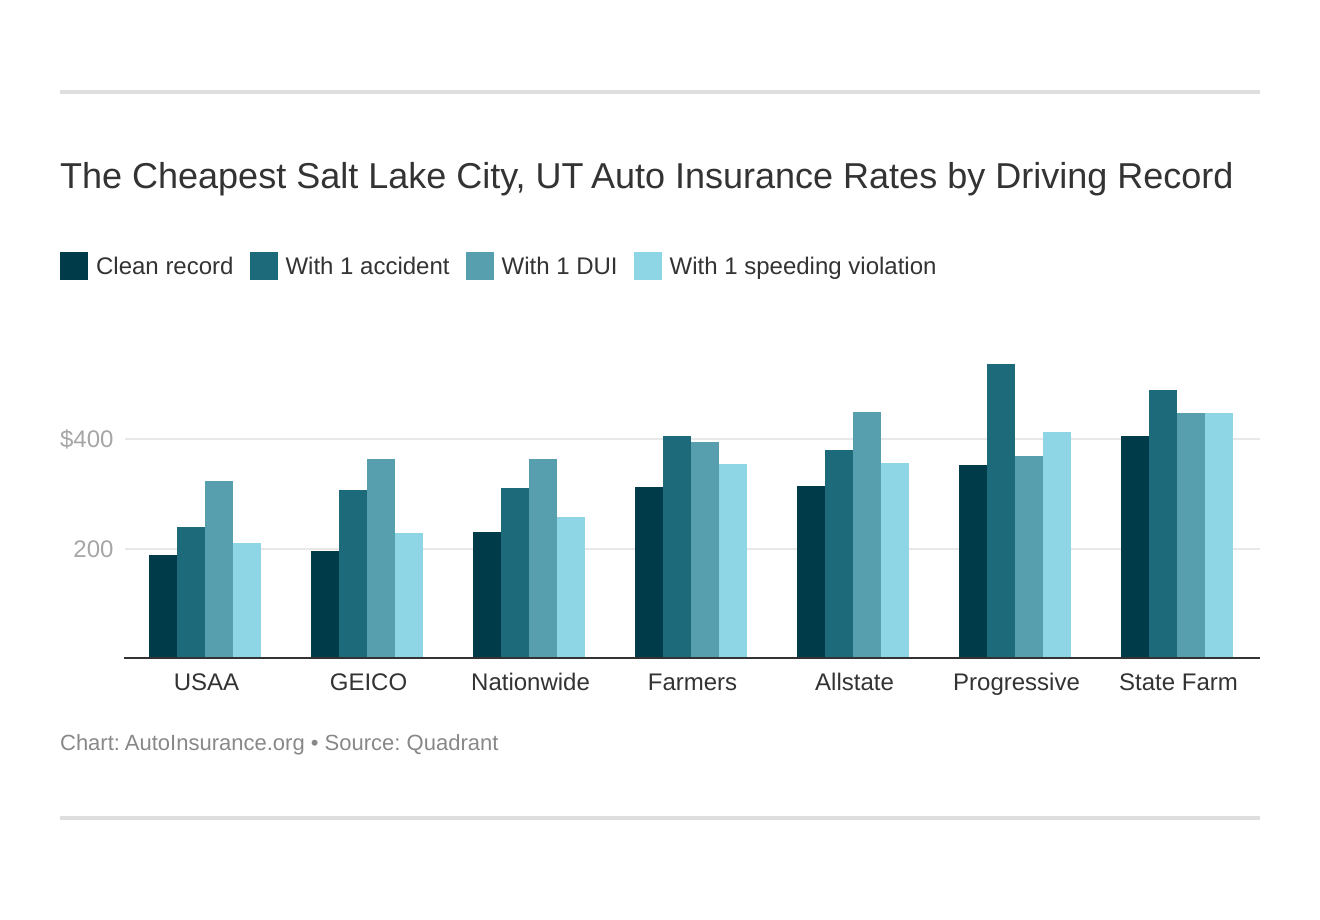 The Cheapest Salt Lake City, UT Auto Insurance Rates by Driving Record